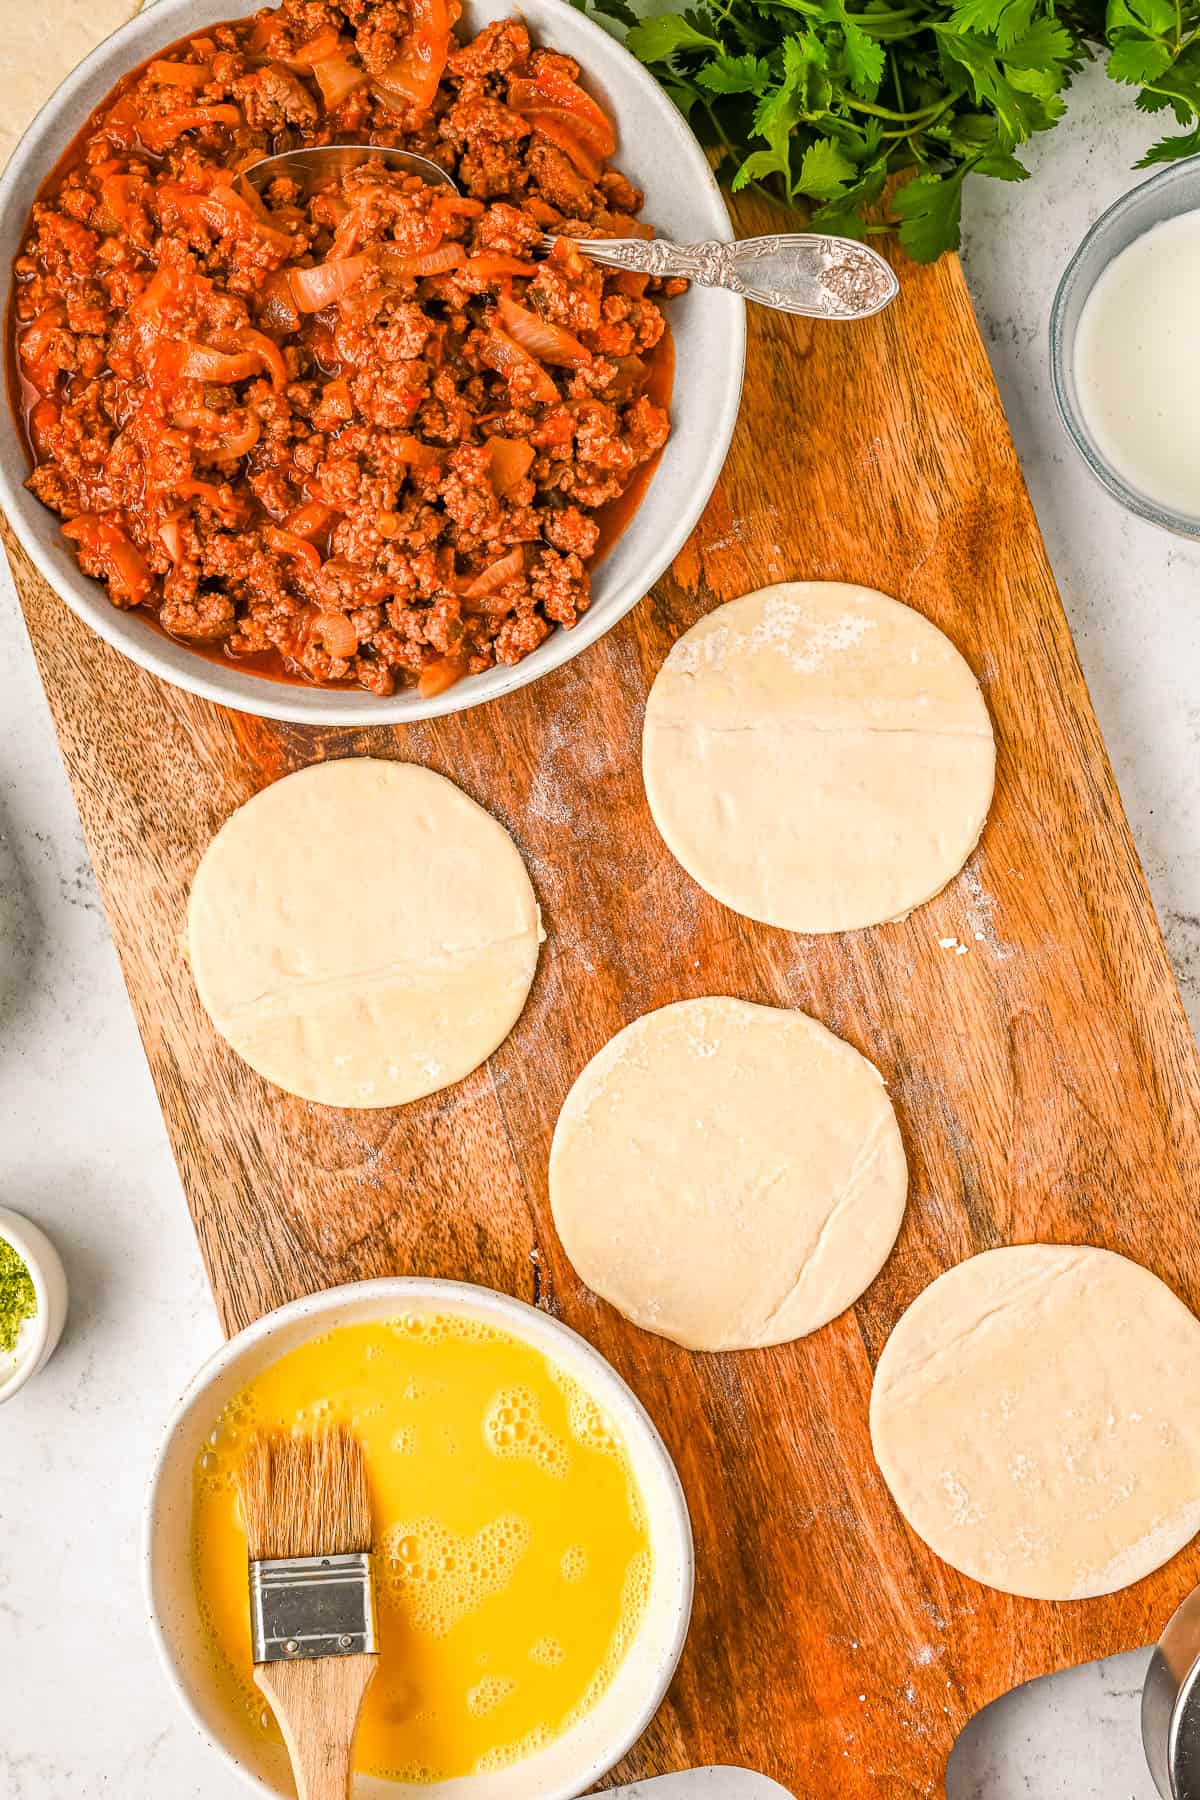 Empanada dough rounds laid out on a wooden cutting board, ready to be topped with chicken empanada filling and cheese.